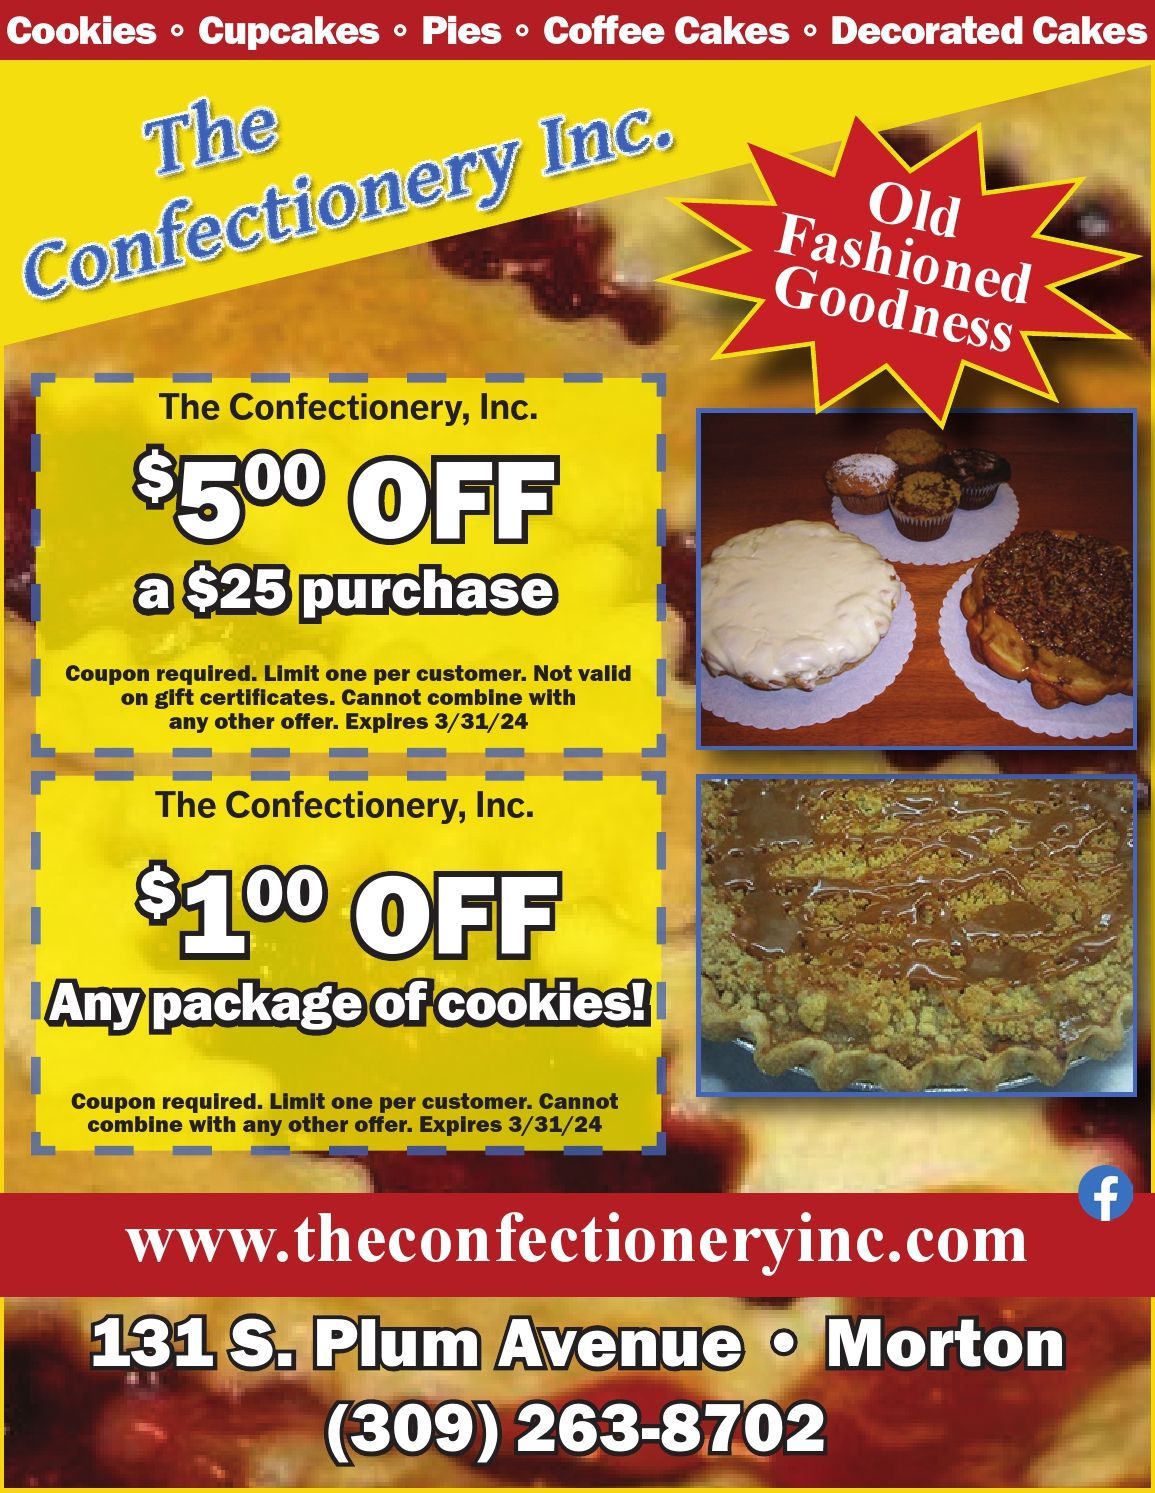 The Confectionery Inc. cookies, pies, cupcakes, coffee cakes, decorated cakes, $5 off and $1 off coupons Morton, IL